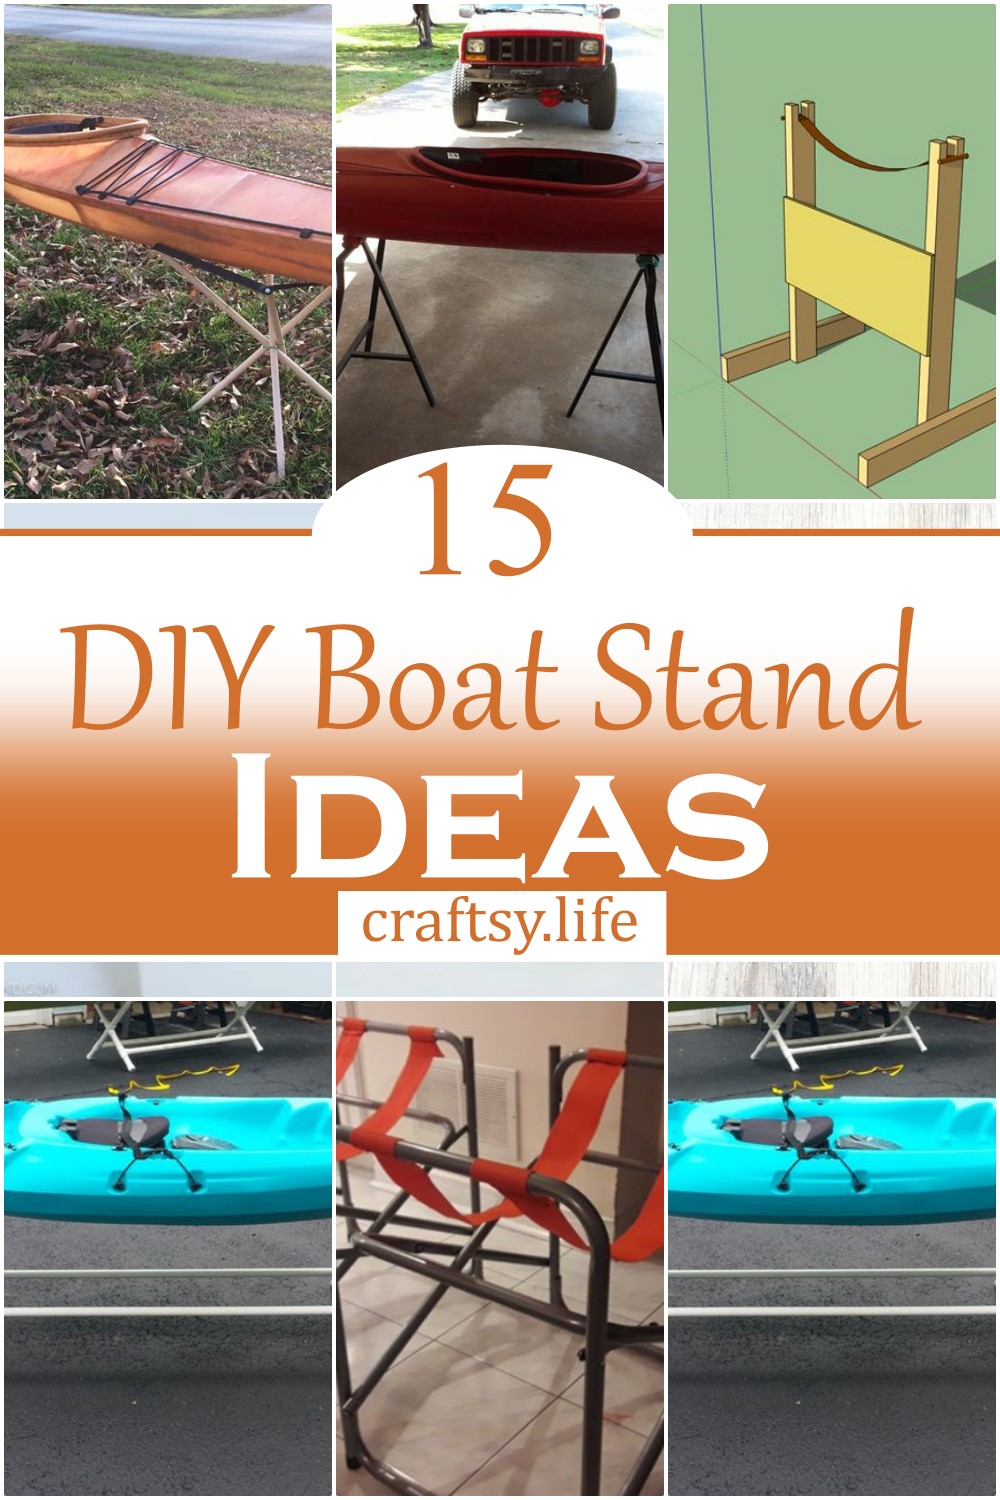 DIY Boat Stand Ideas 1